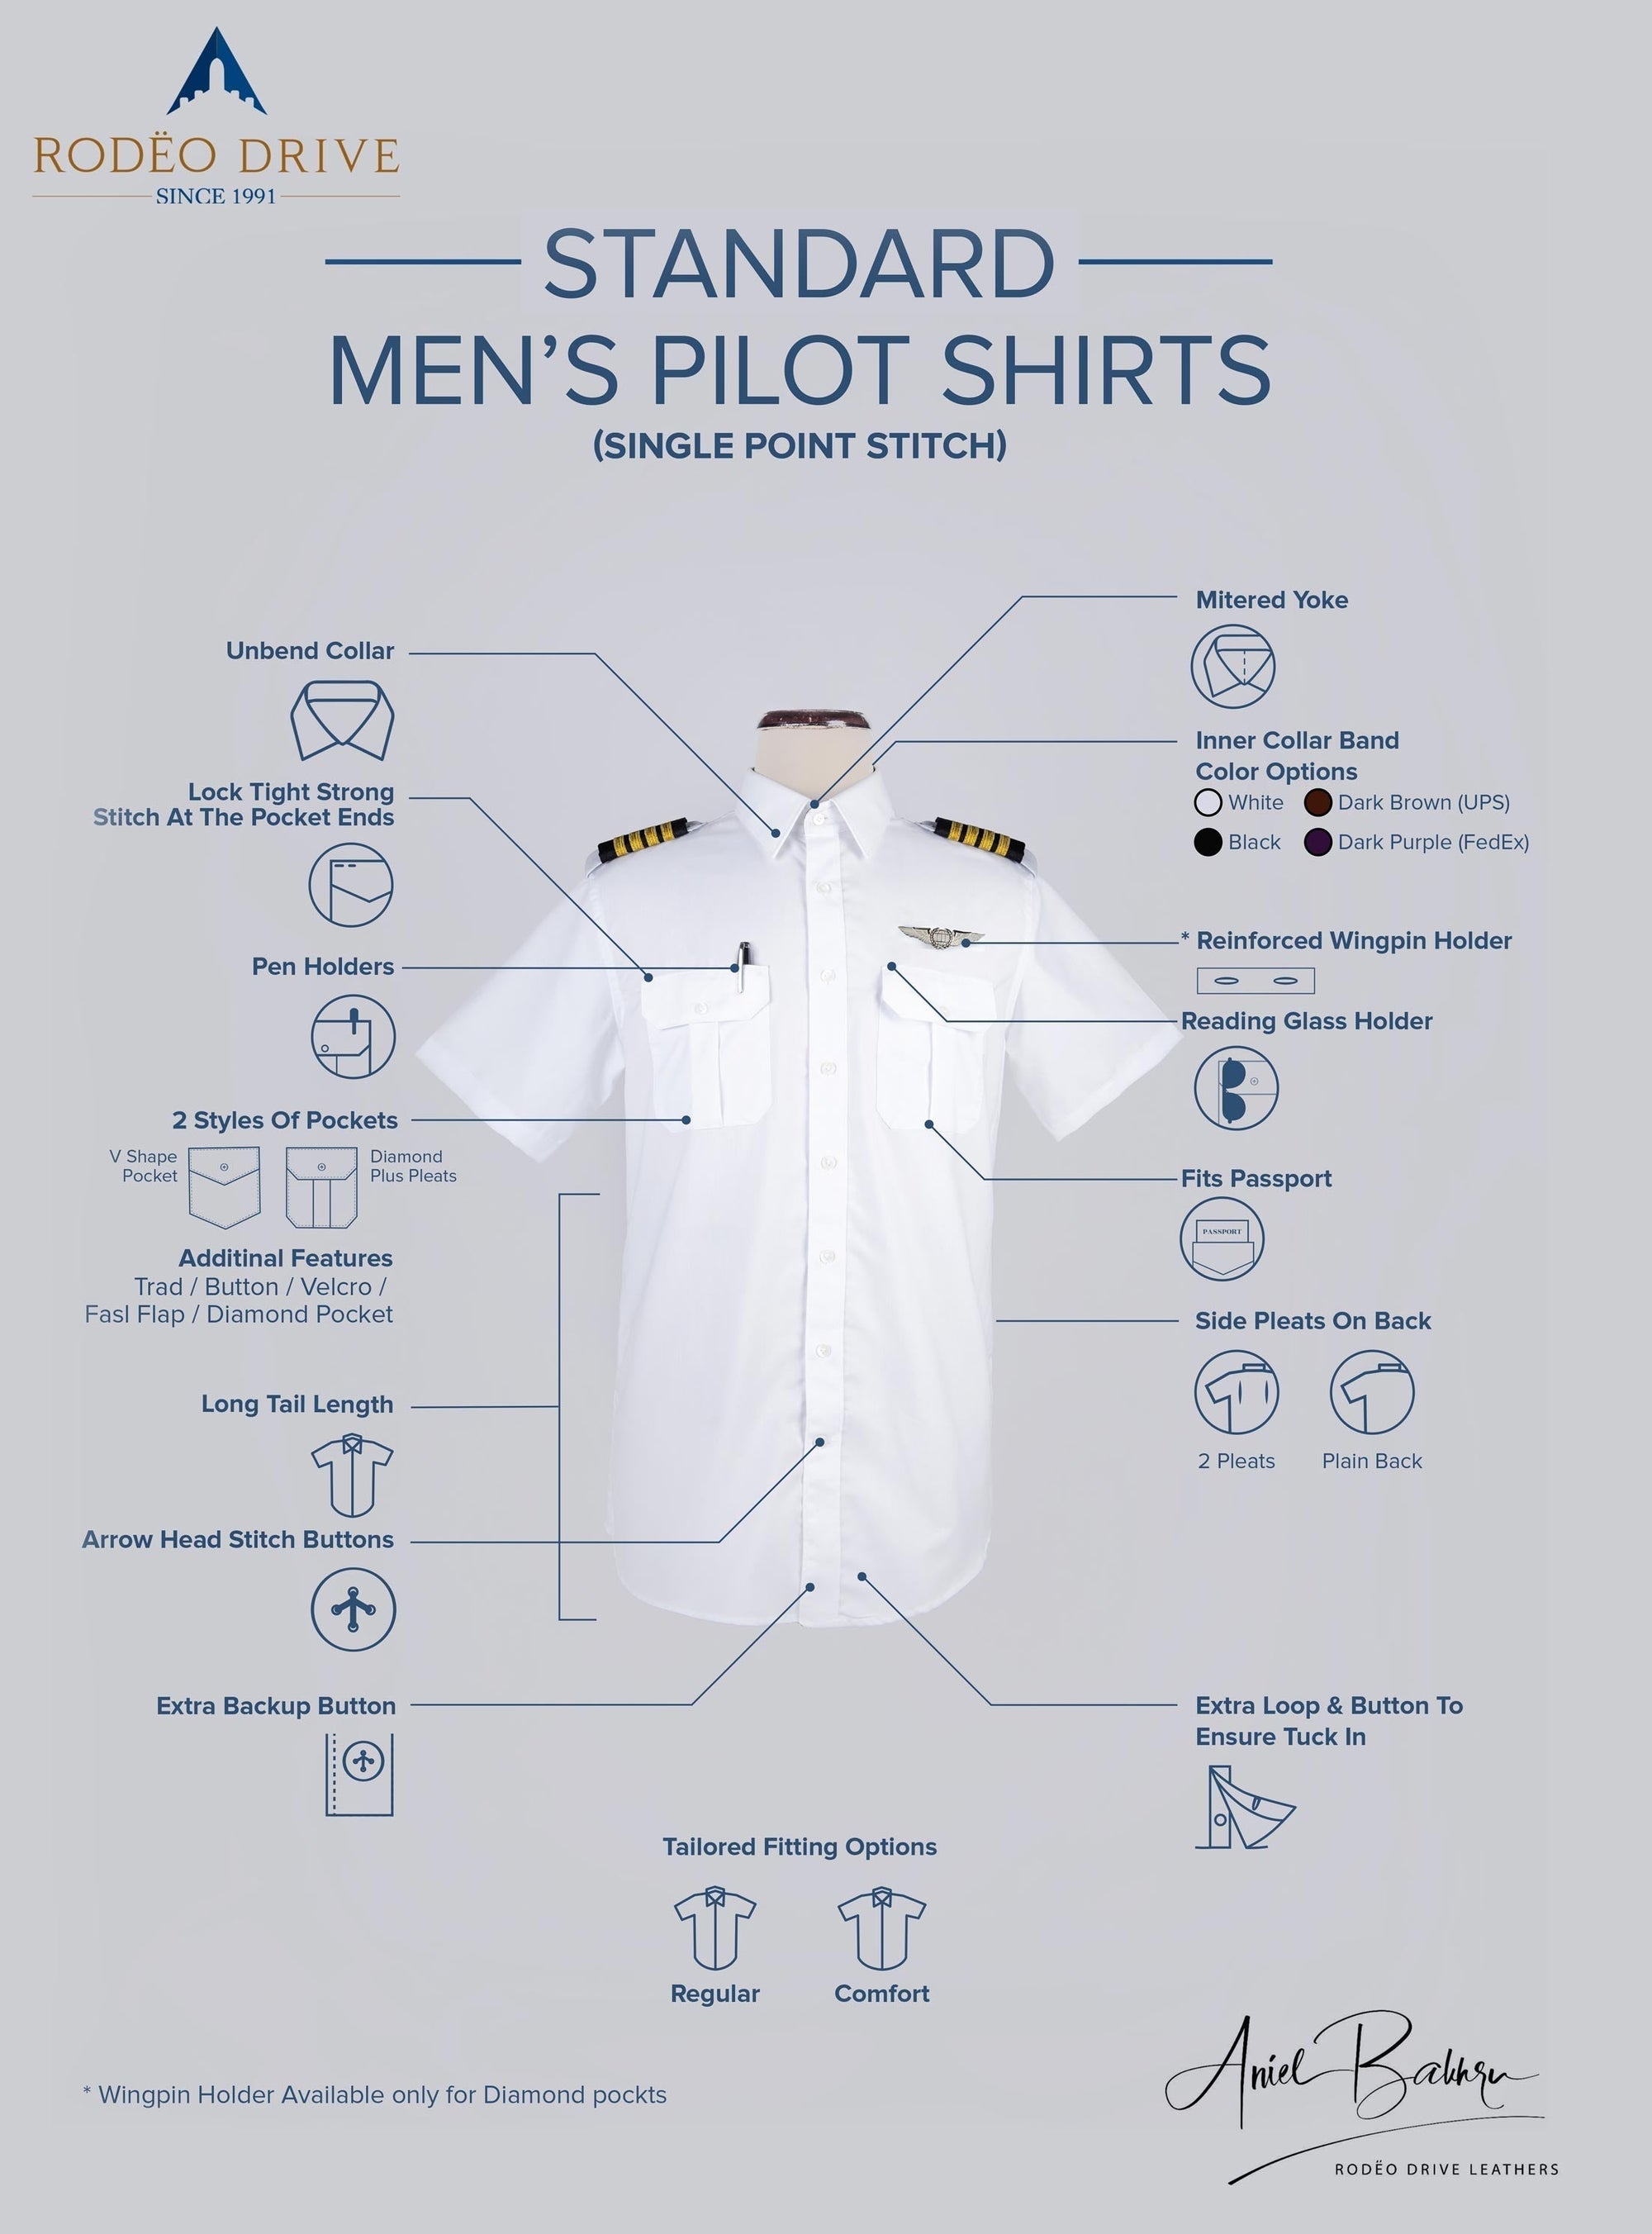 Complete anatomy of white Standard Pilot Shirt. Every part of it is described in detail.